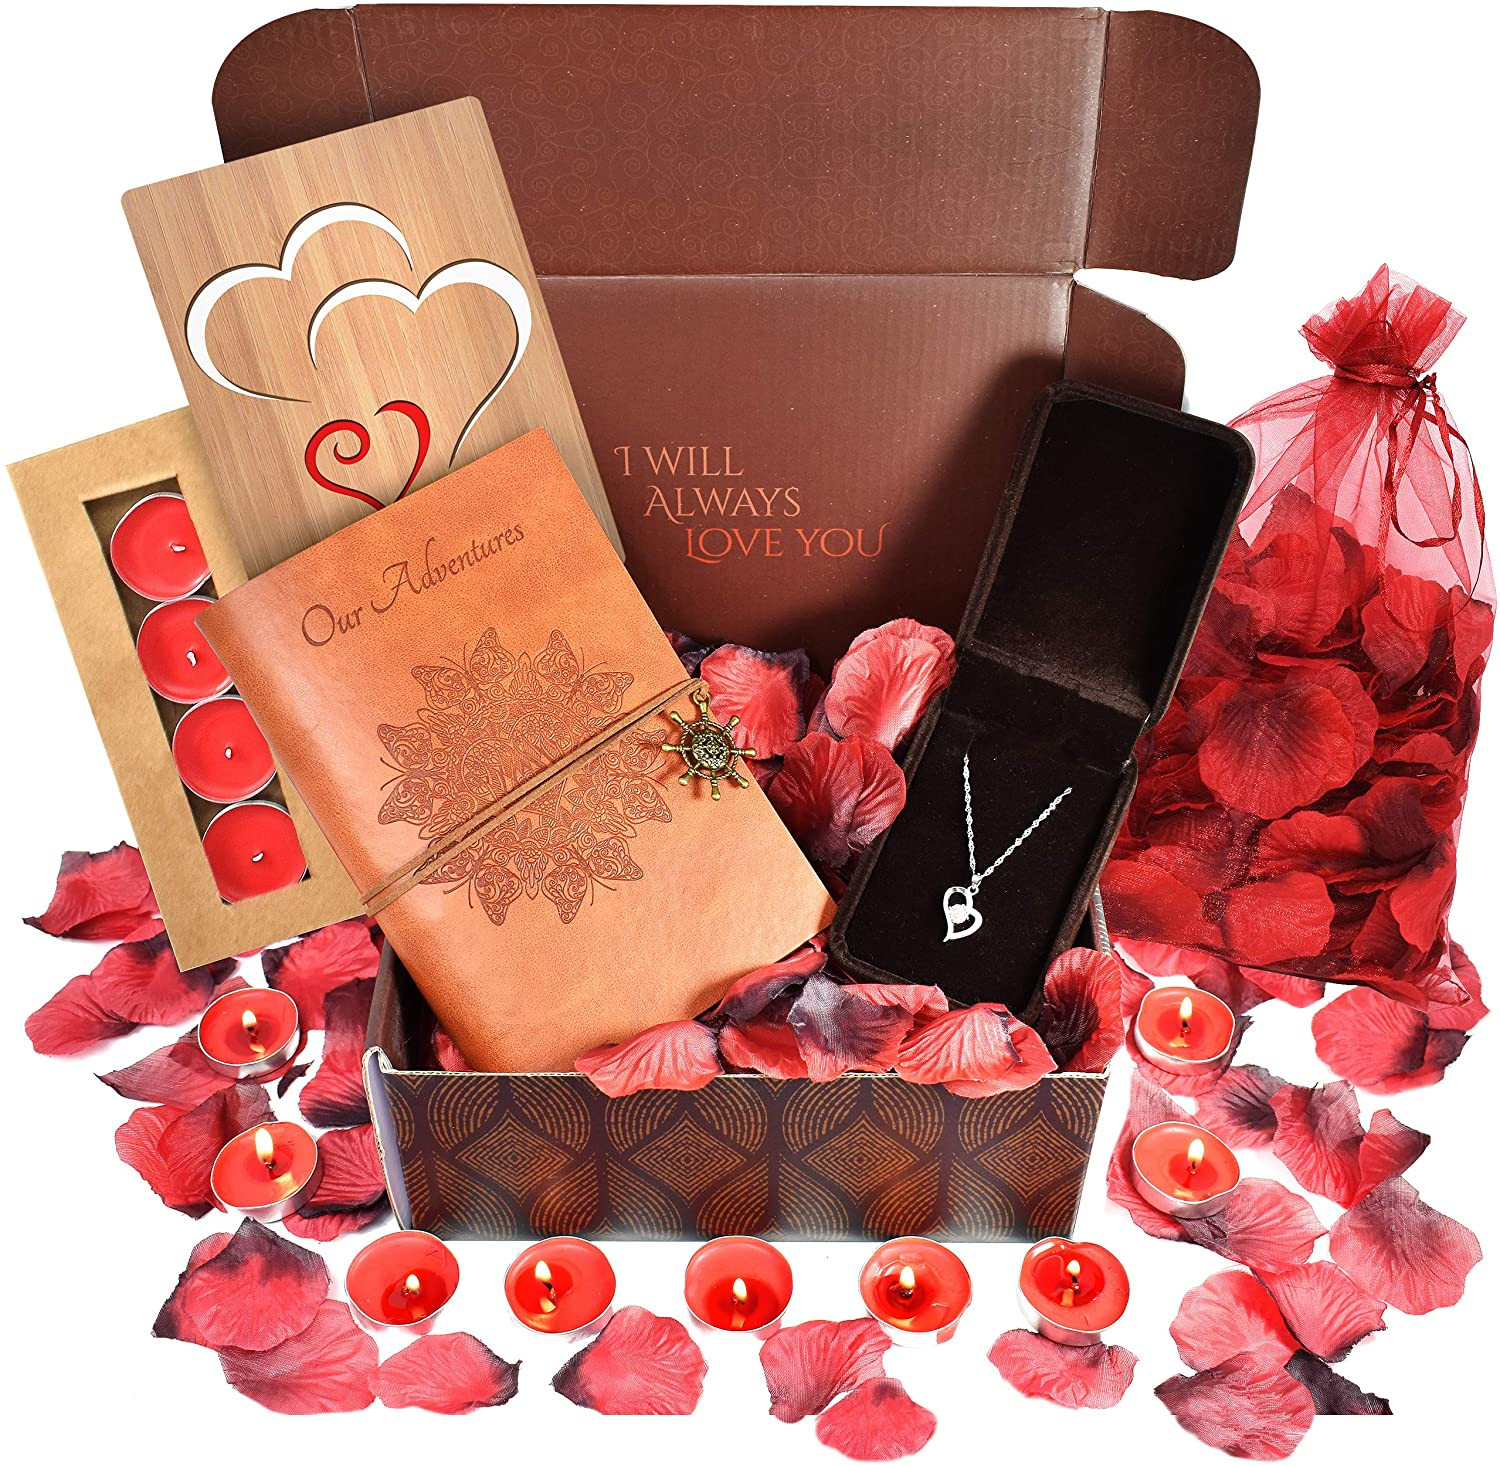 Romantic Valentines Day Gifts
 Best Valentine s Day Gift & Anniversary Gifts For Her